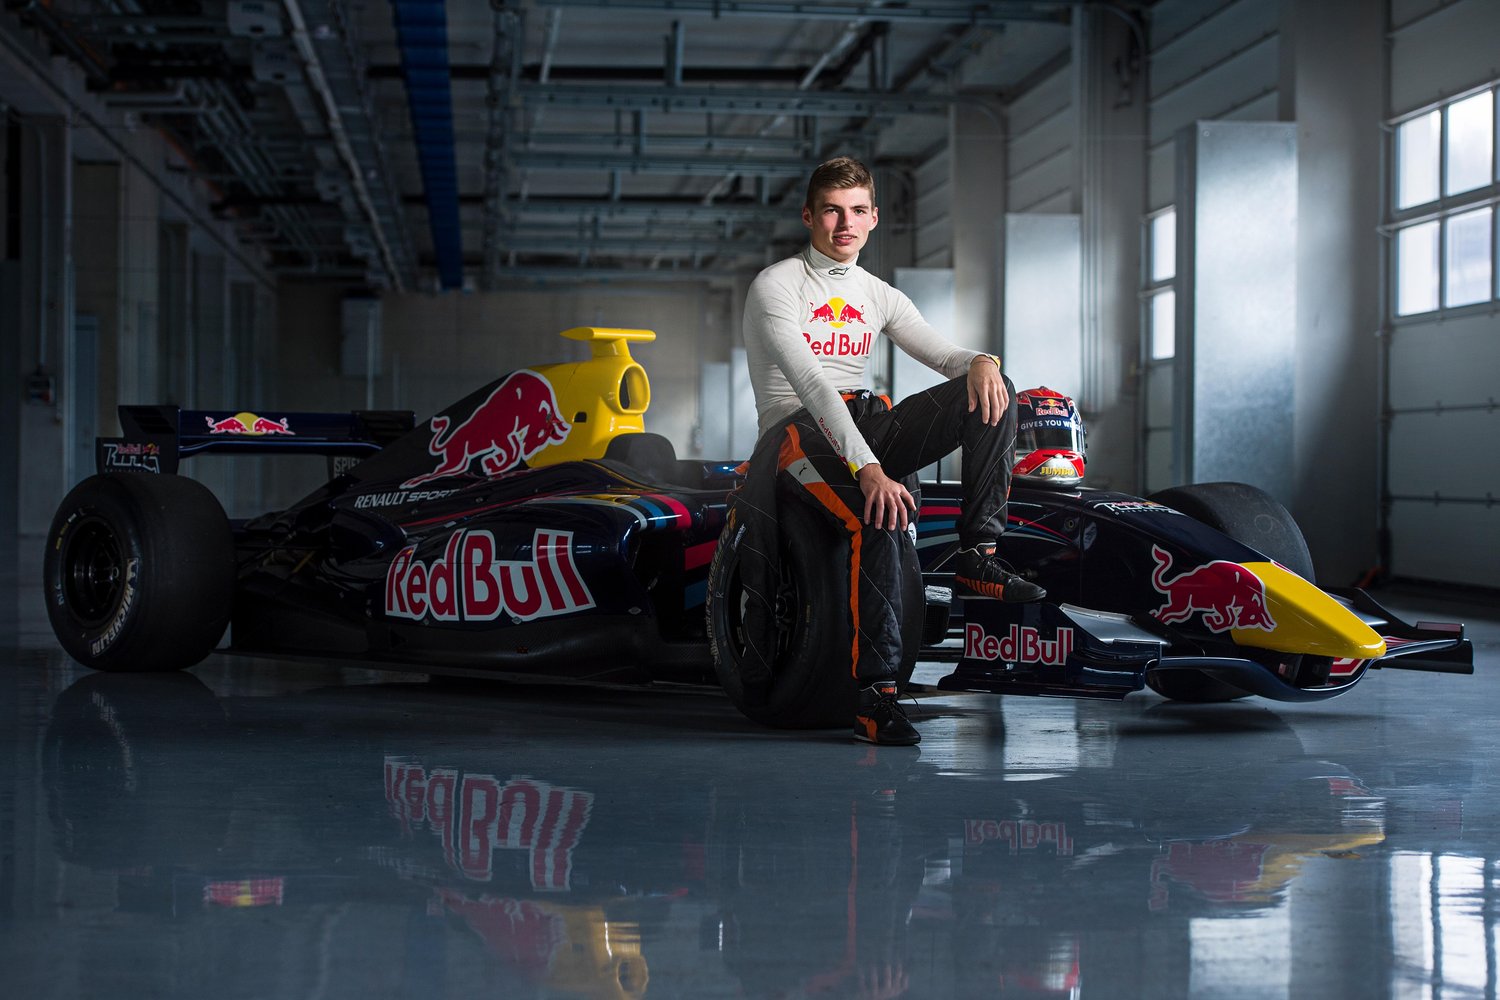 max-verstappen-to-drive-for-toro-rosso-in-2015-announcement